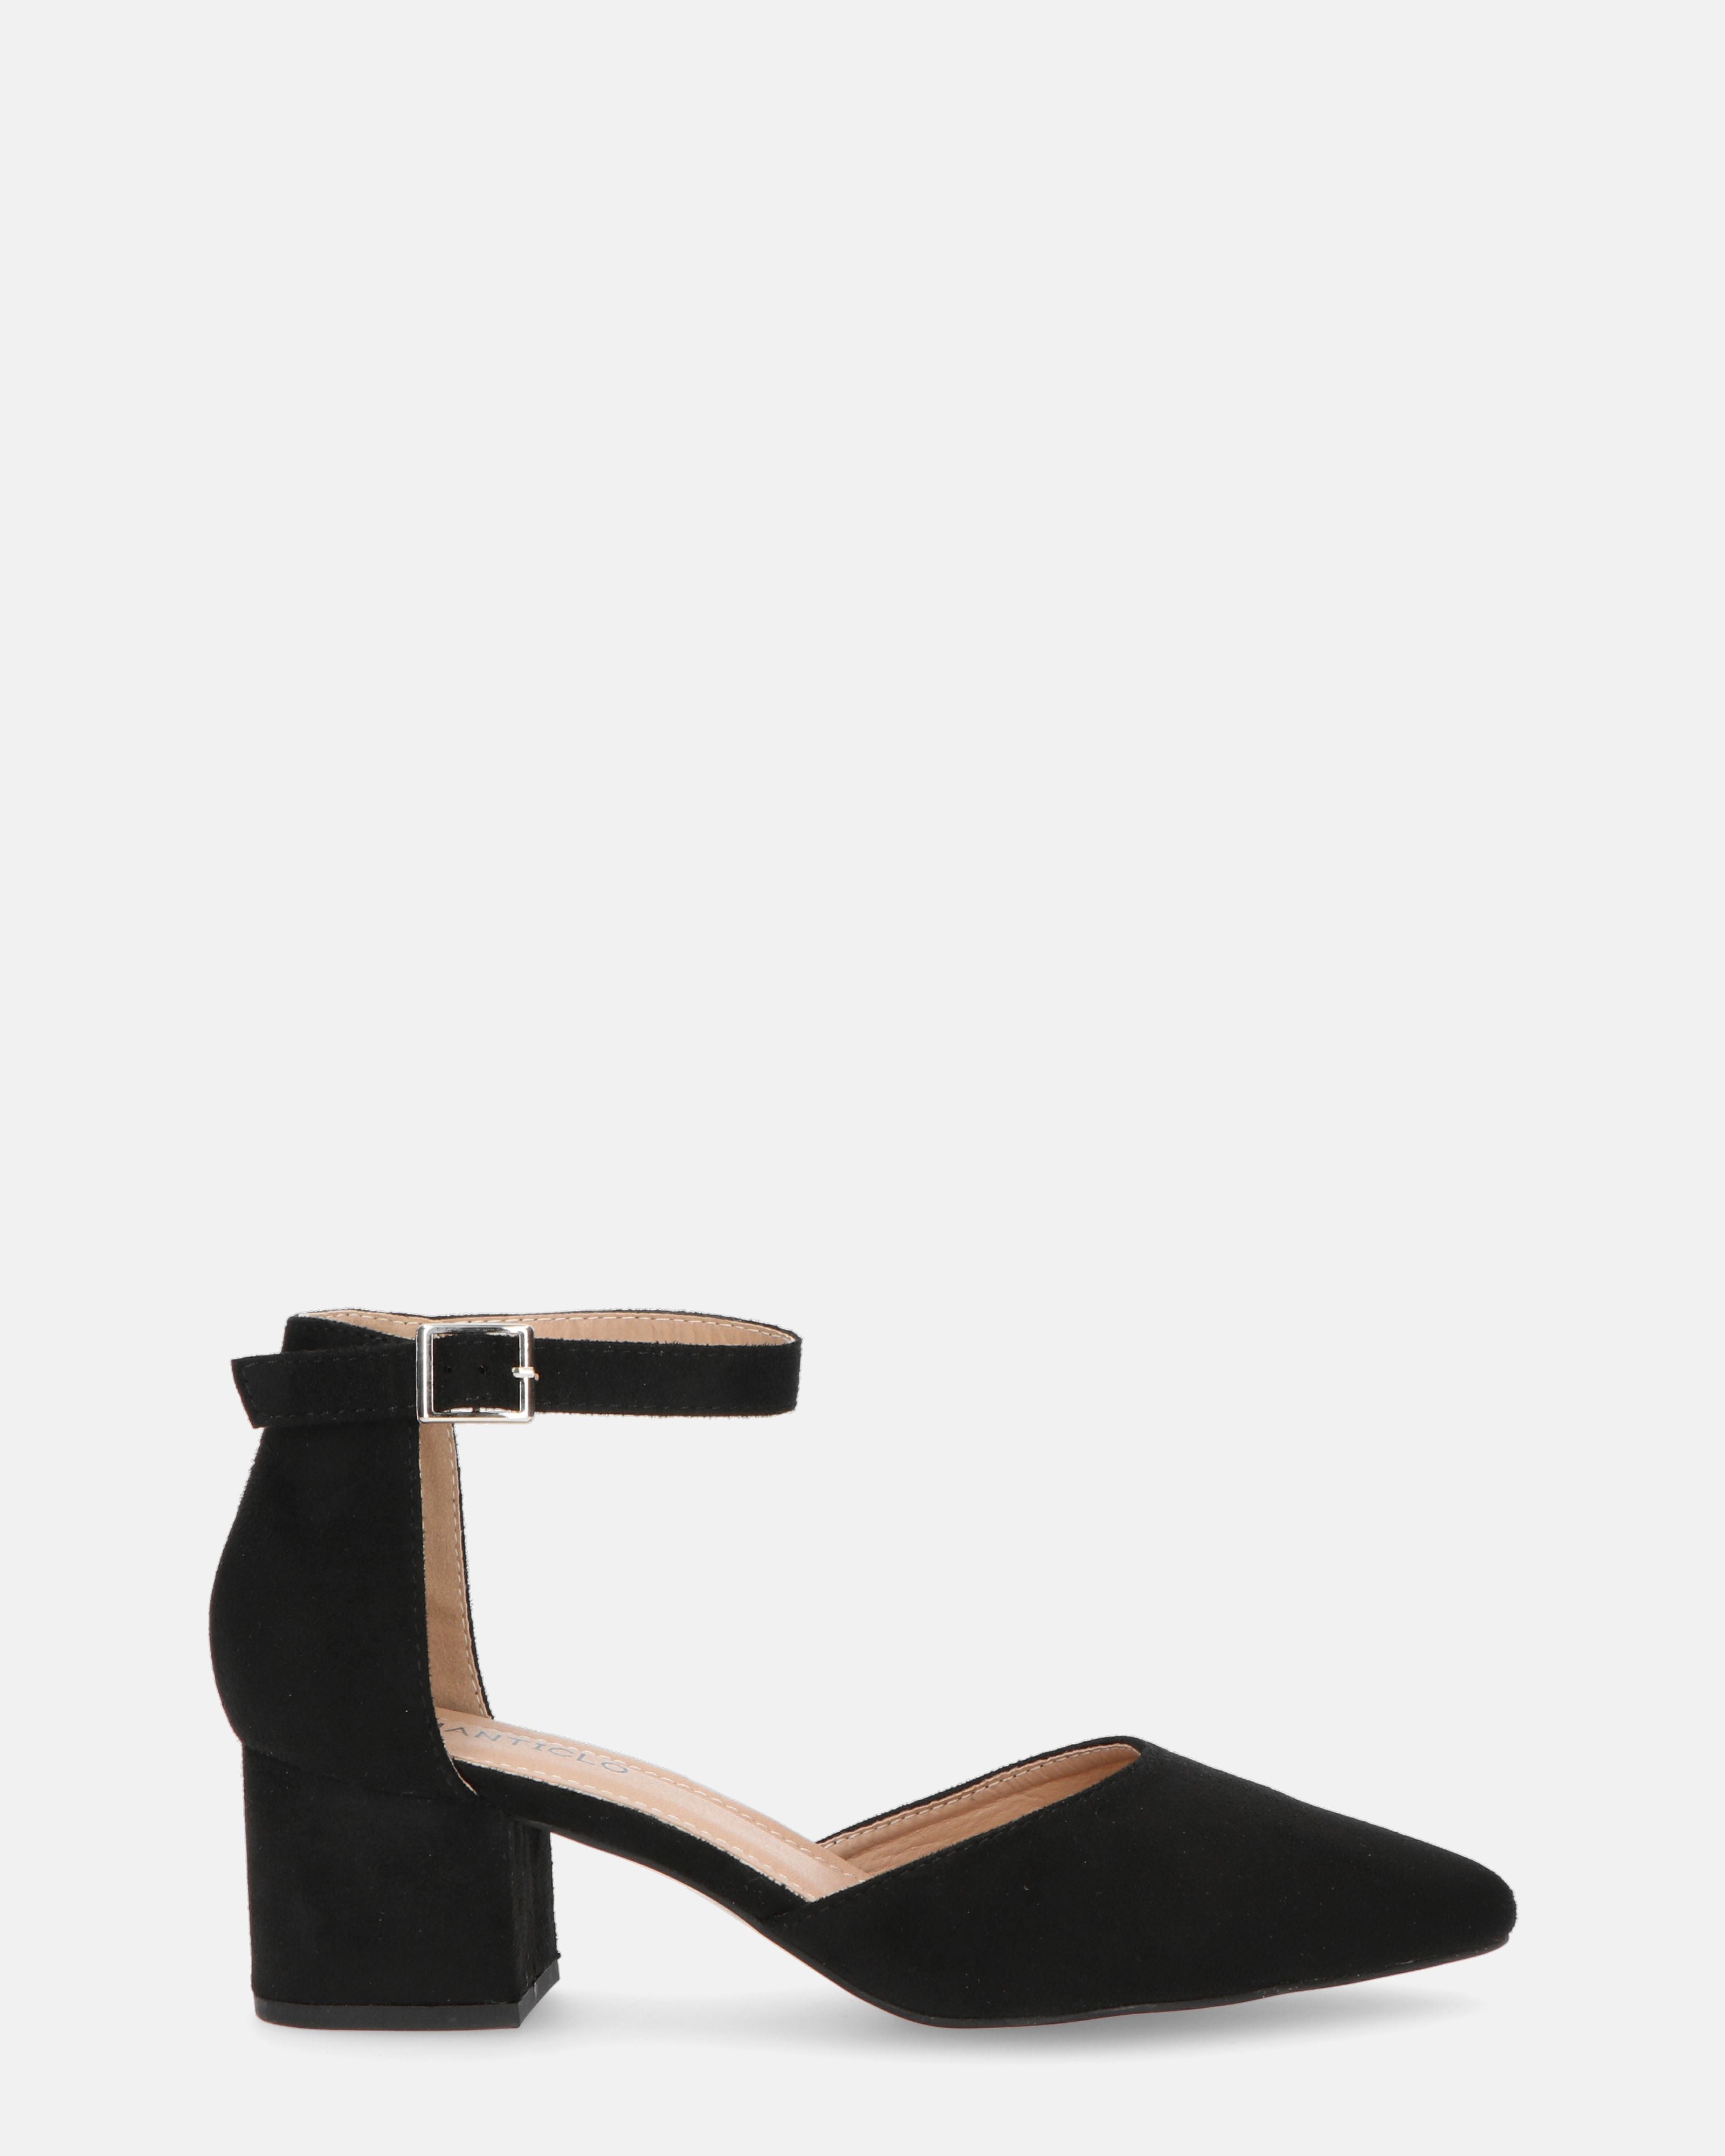 GINNY - mid heeled shoes - QUANTICLO